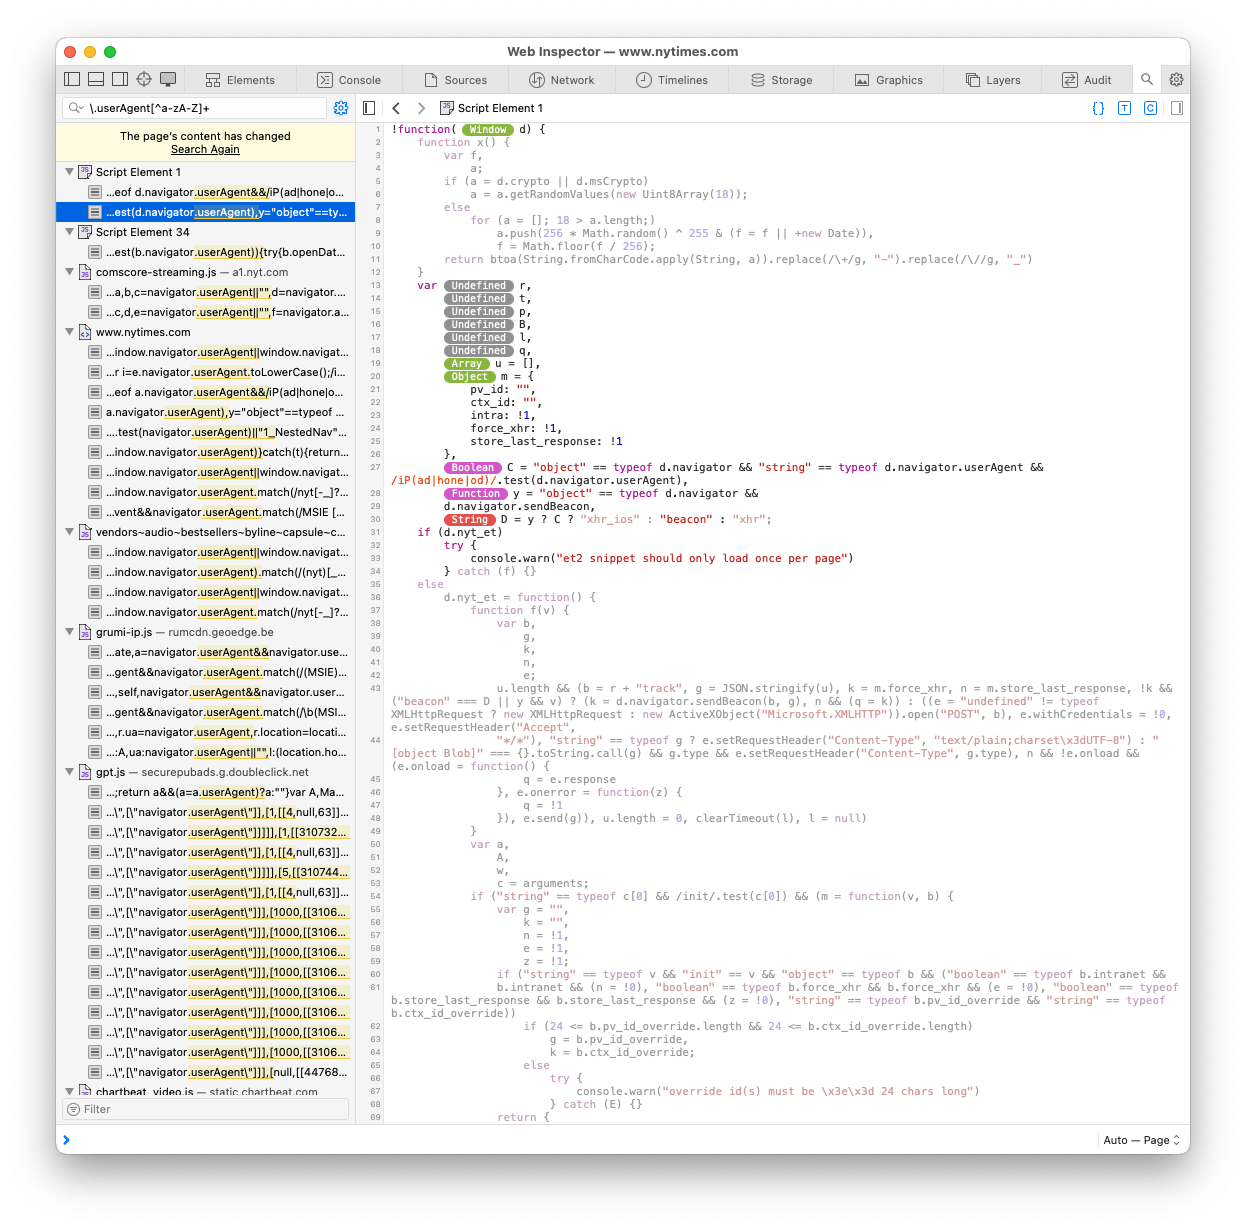 Screenshot of the Web Inspector with the regex search for UserAgent